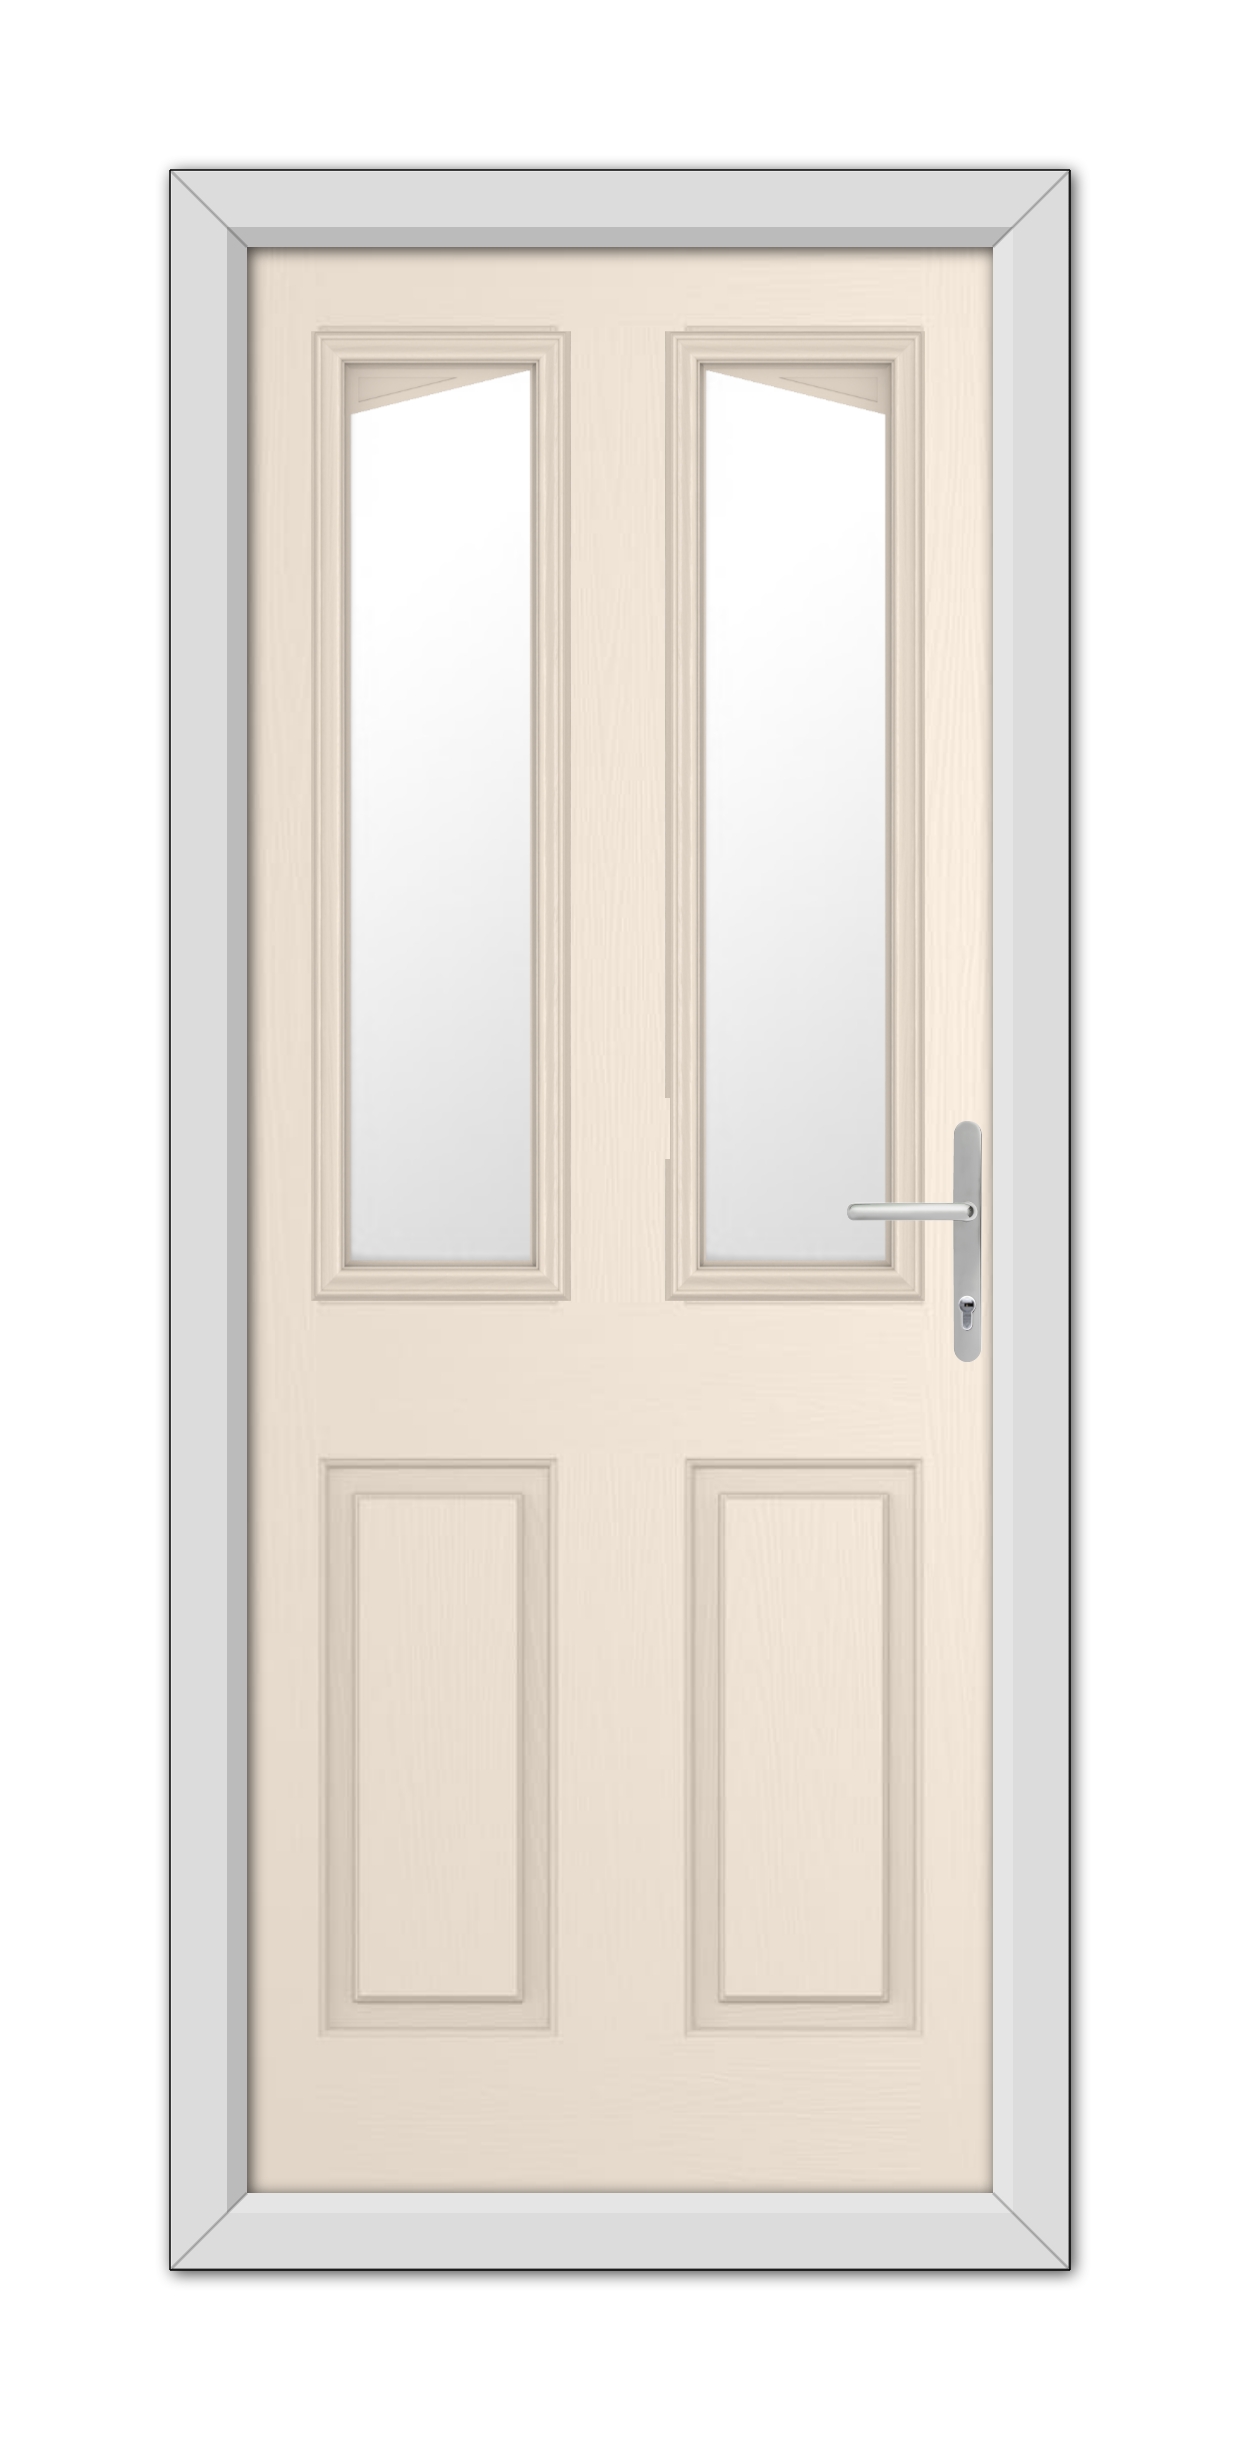 Cream Highbury Composite Door 48mm Timber Core with vertical glass panels at the top, metallic handle, and frame, viewed from the front.